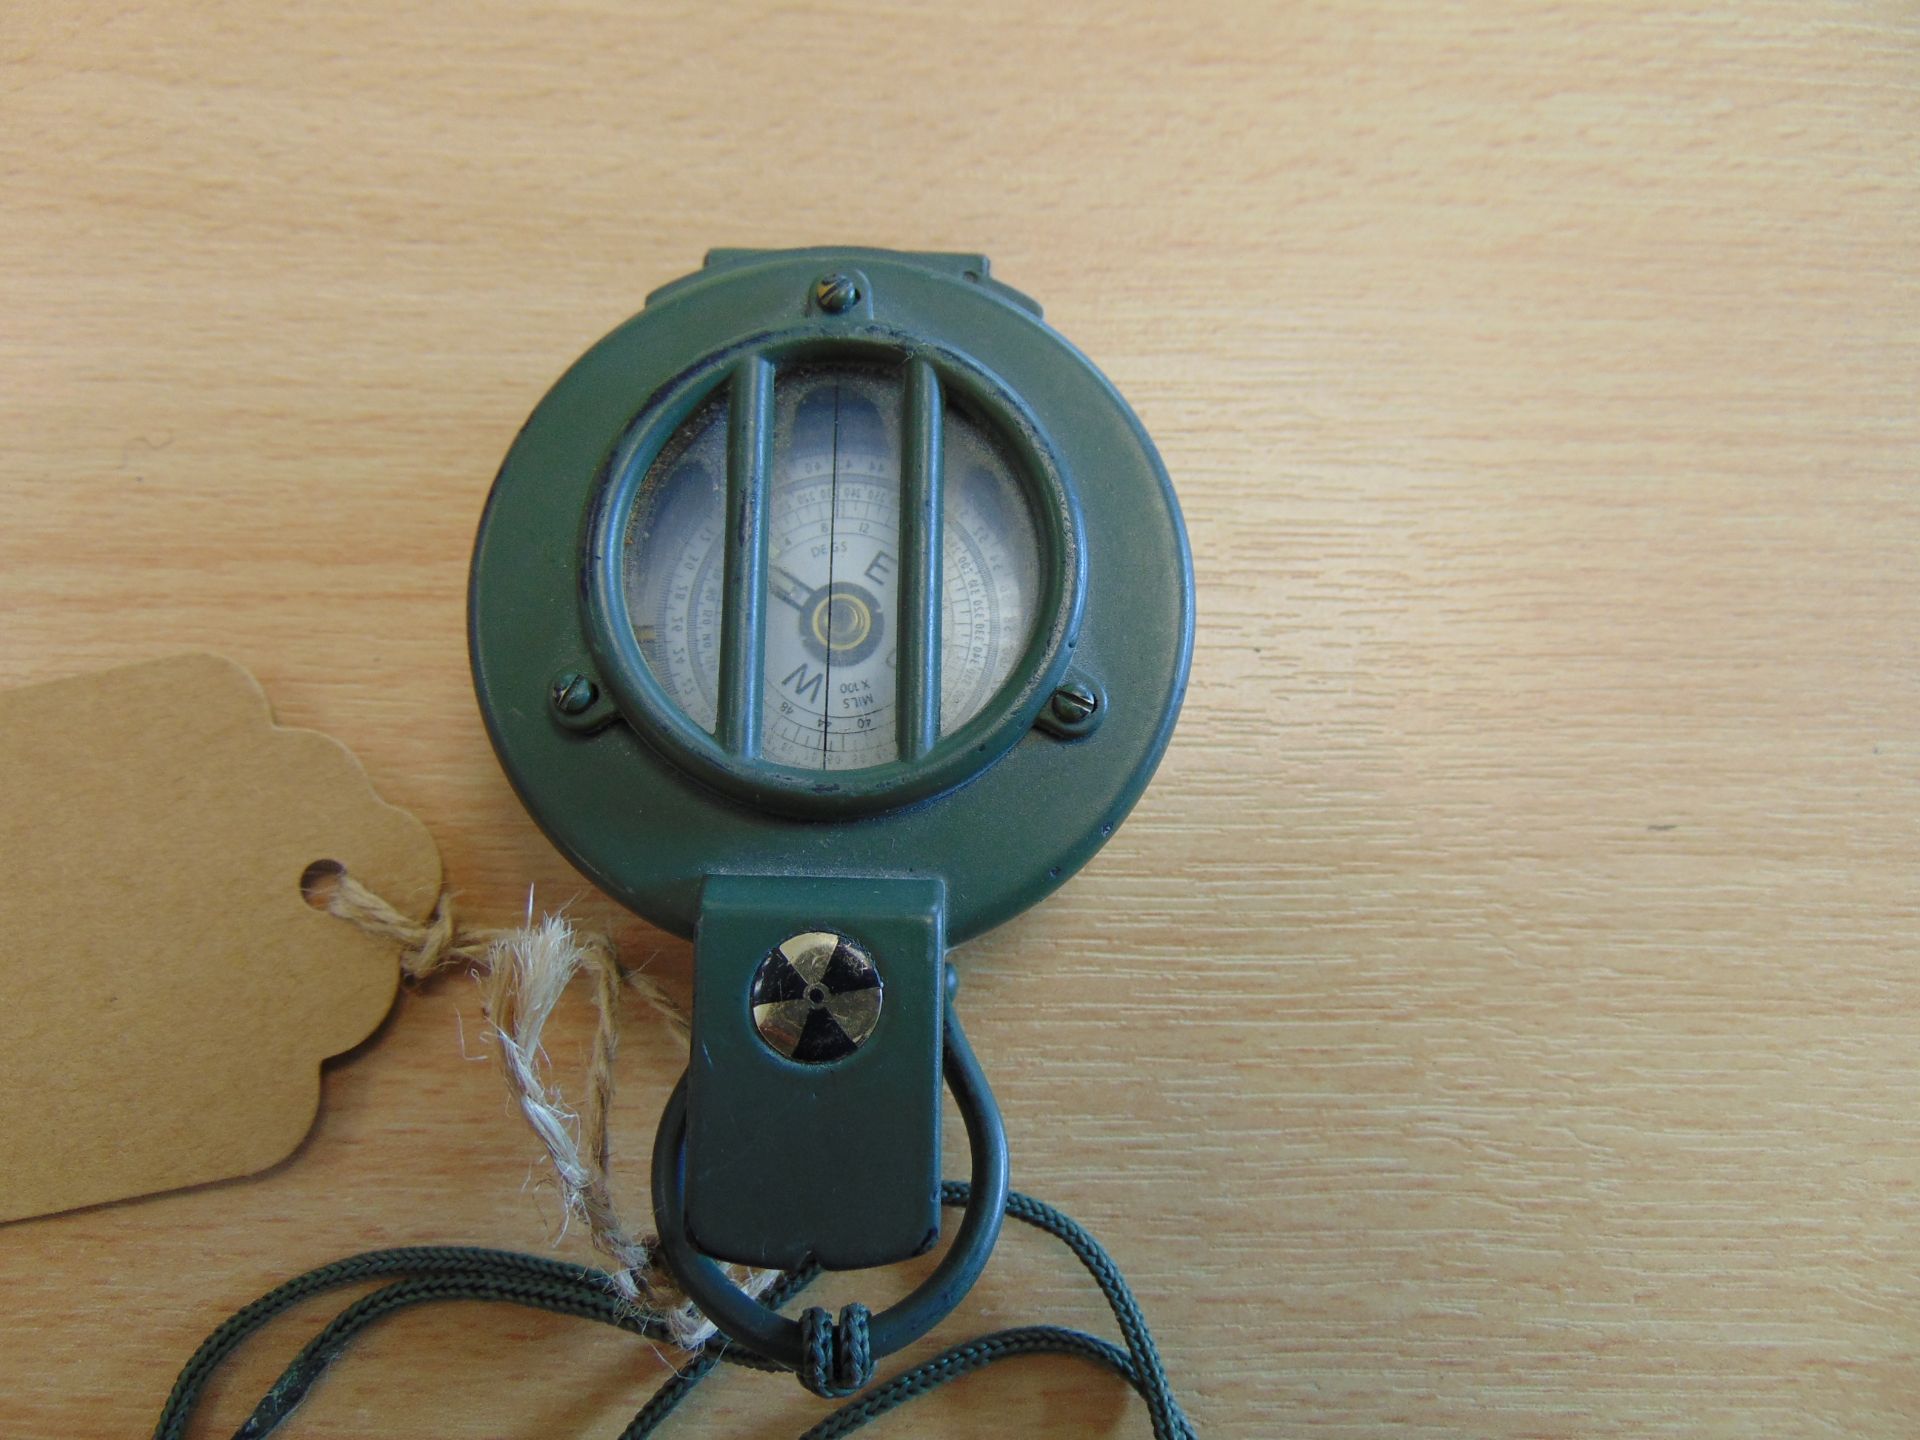 Francis Barker British Army M88 Prismatic Compass in Mils - Image 3 of 4